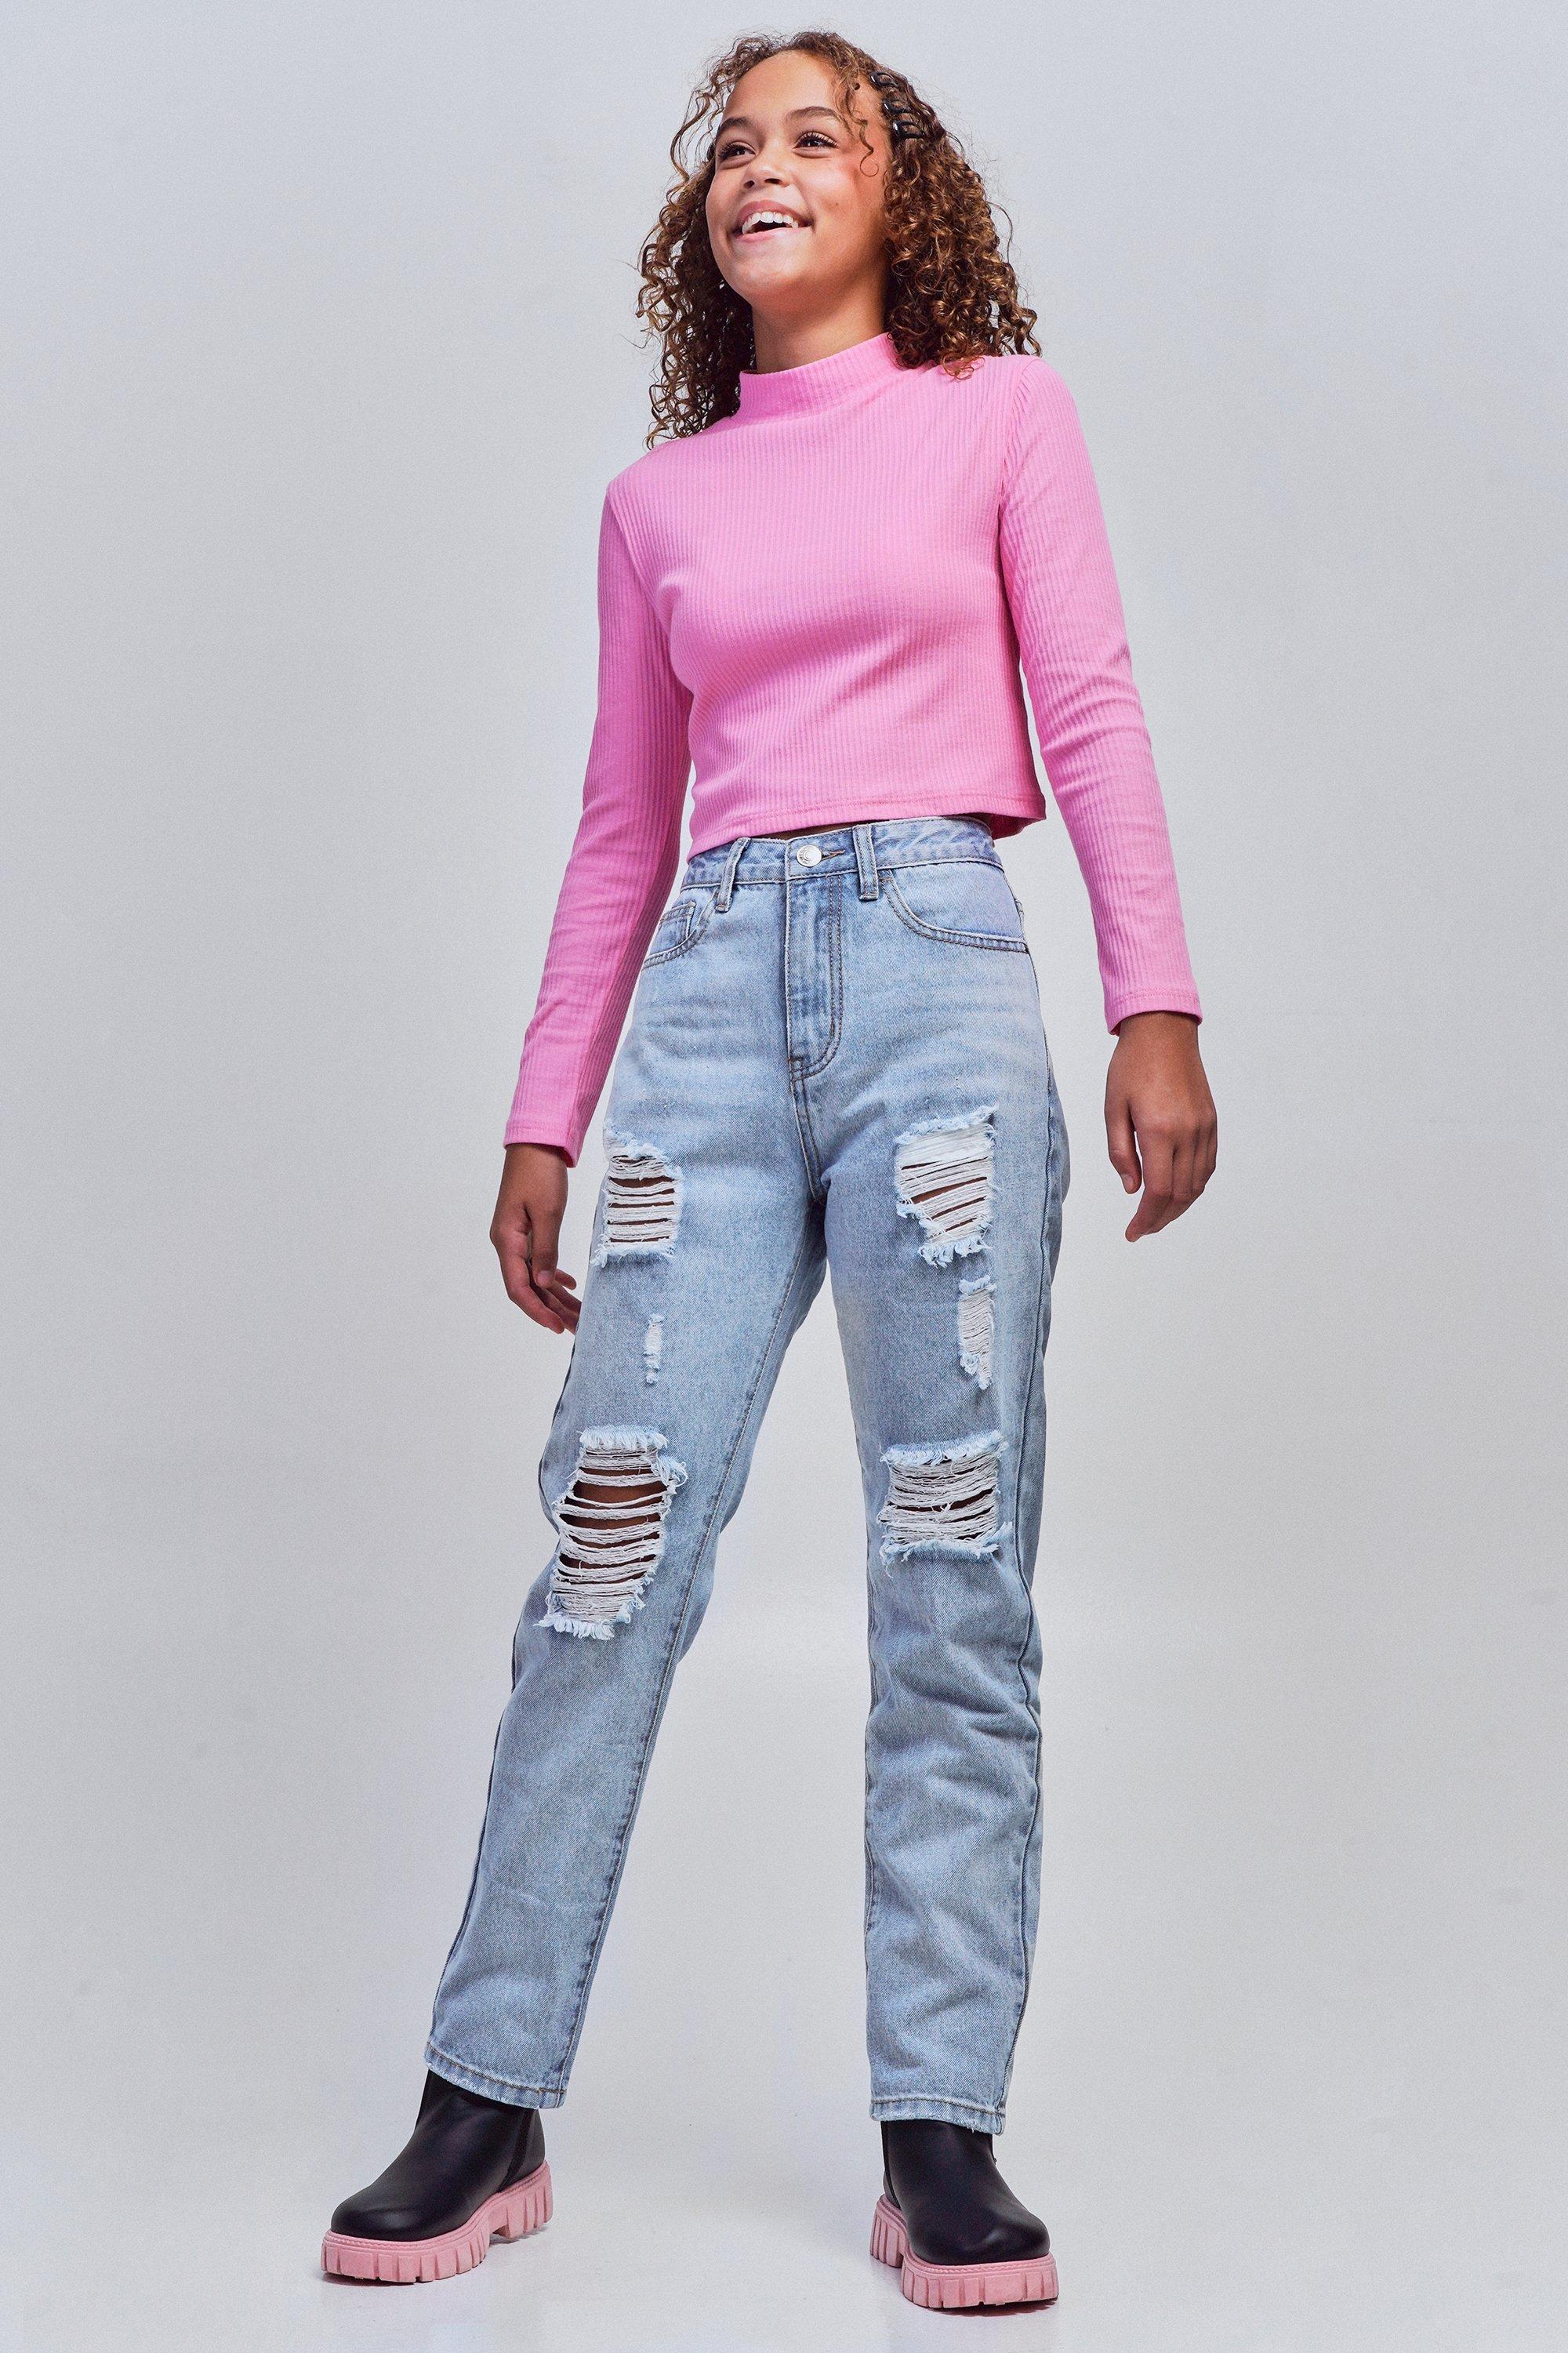 Ripped jeans by Oakridge Mr Price  Boyfriend denim, Ripped jeans, Clothes